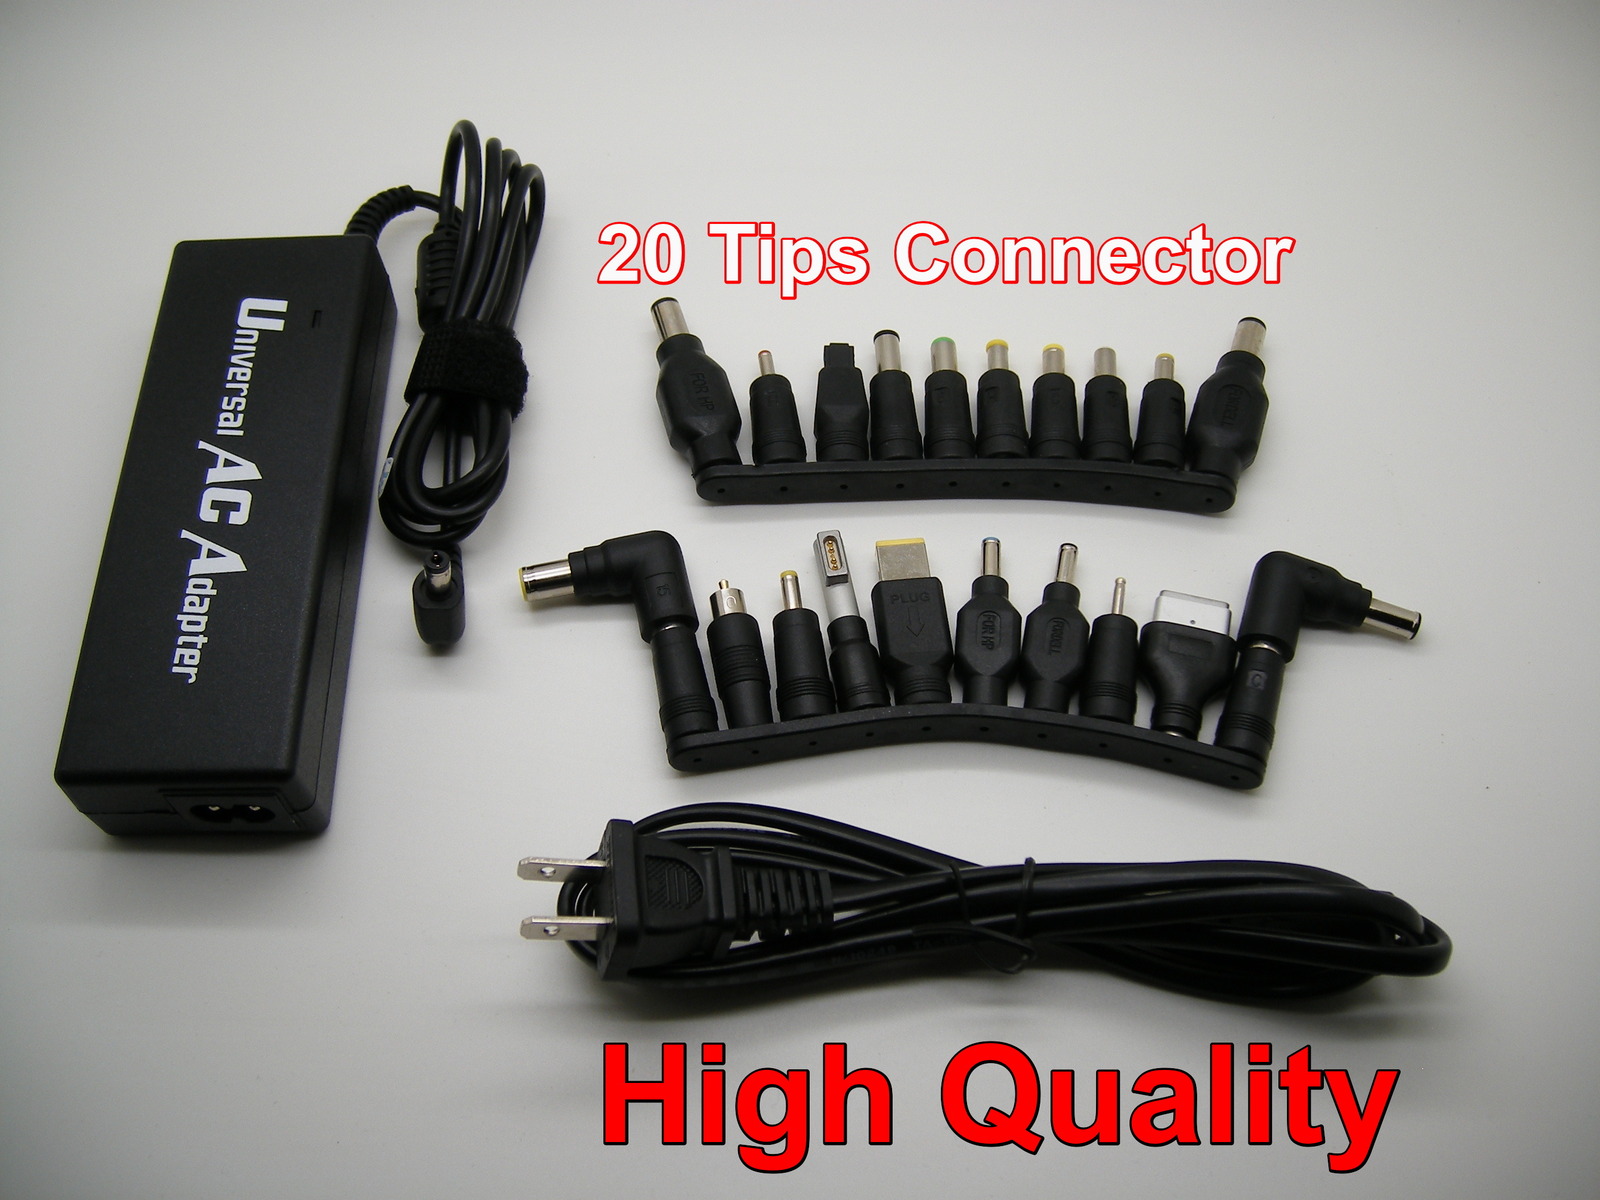 Primary image for Universal Laptop Charger for Pc & MacBook Technician Edition